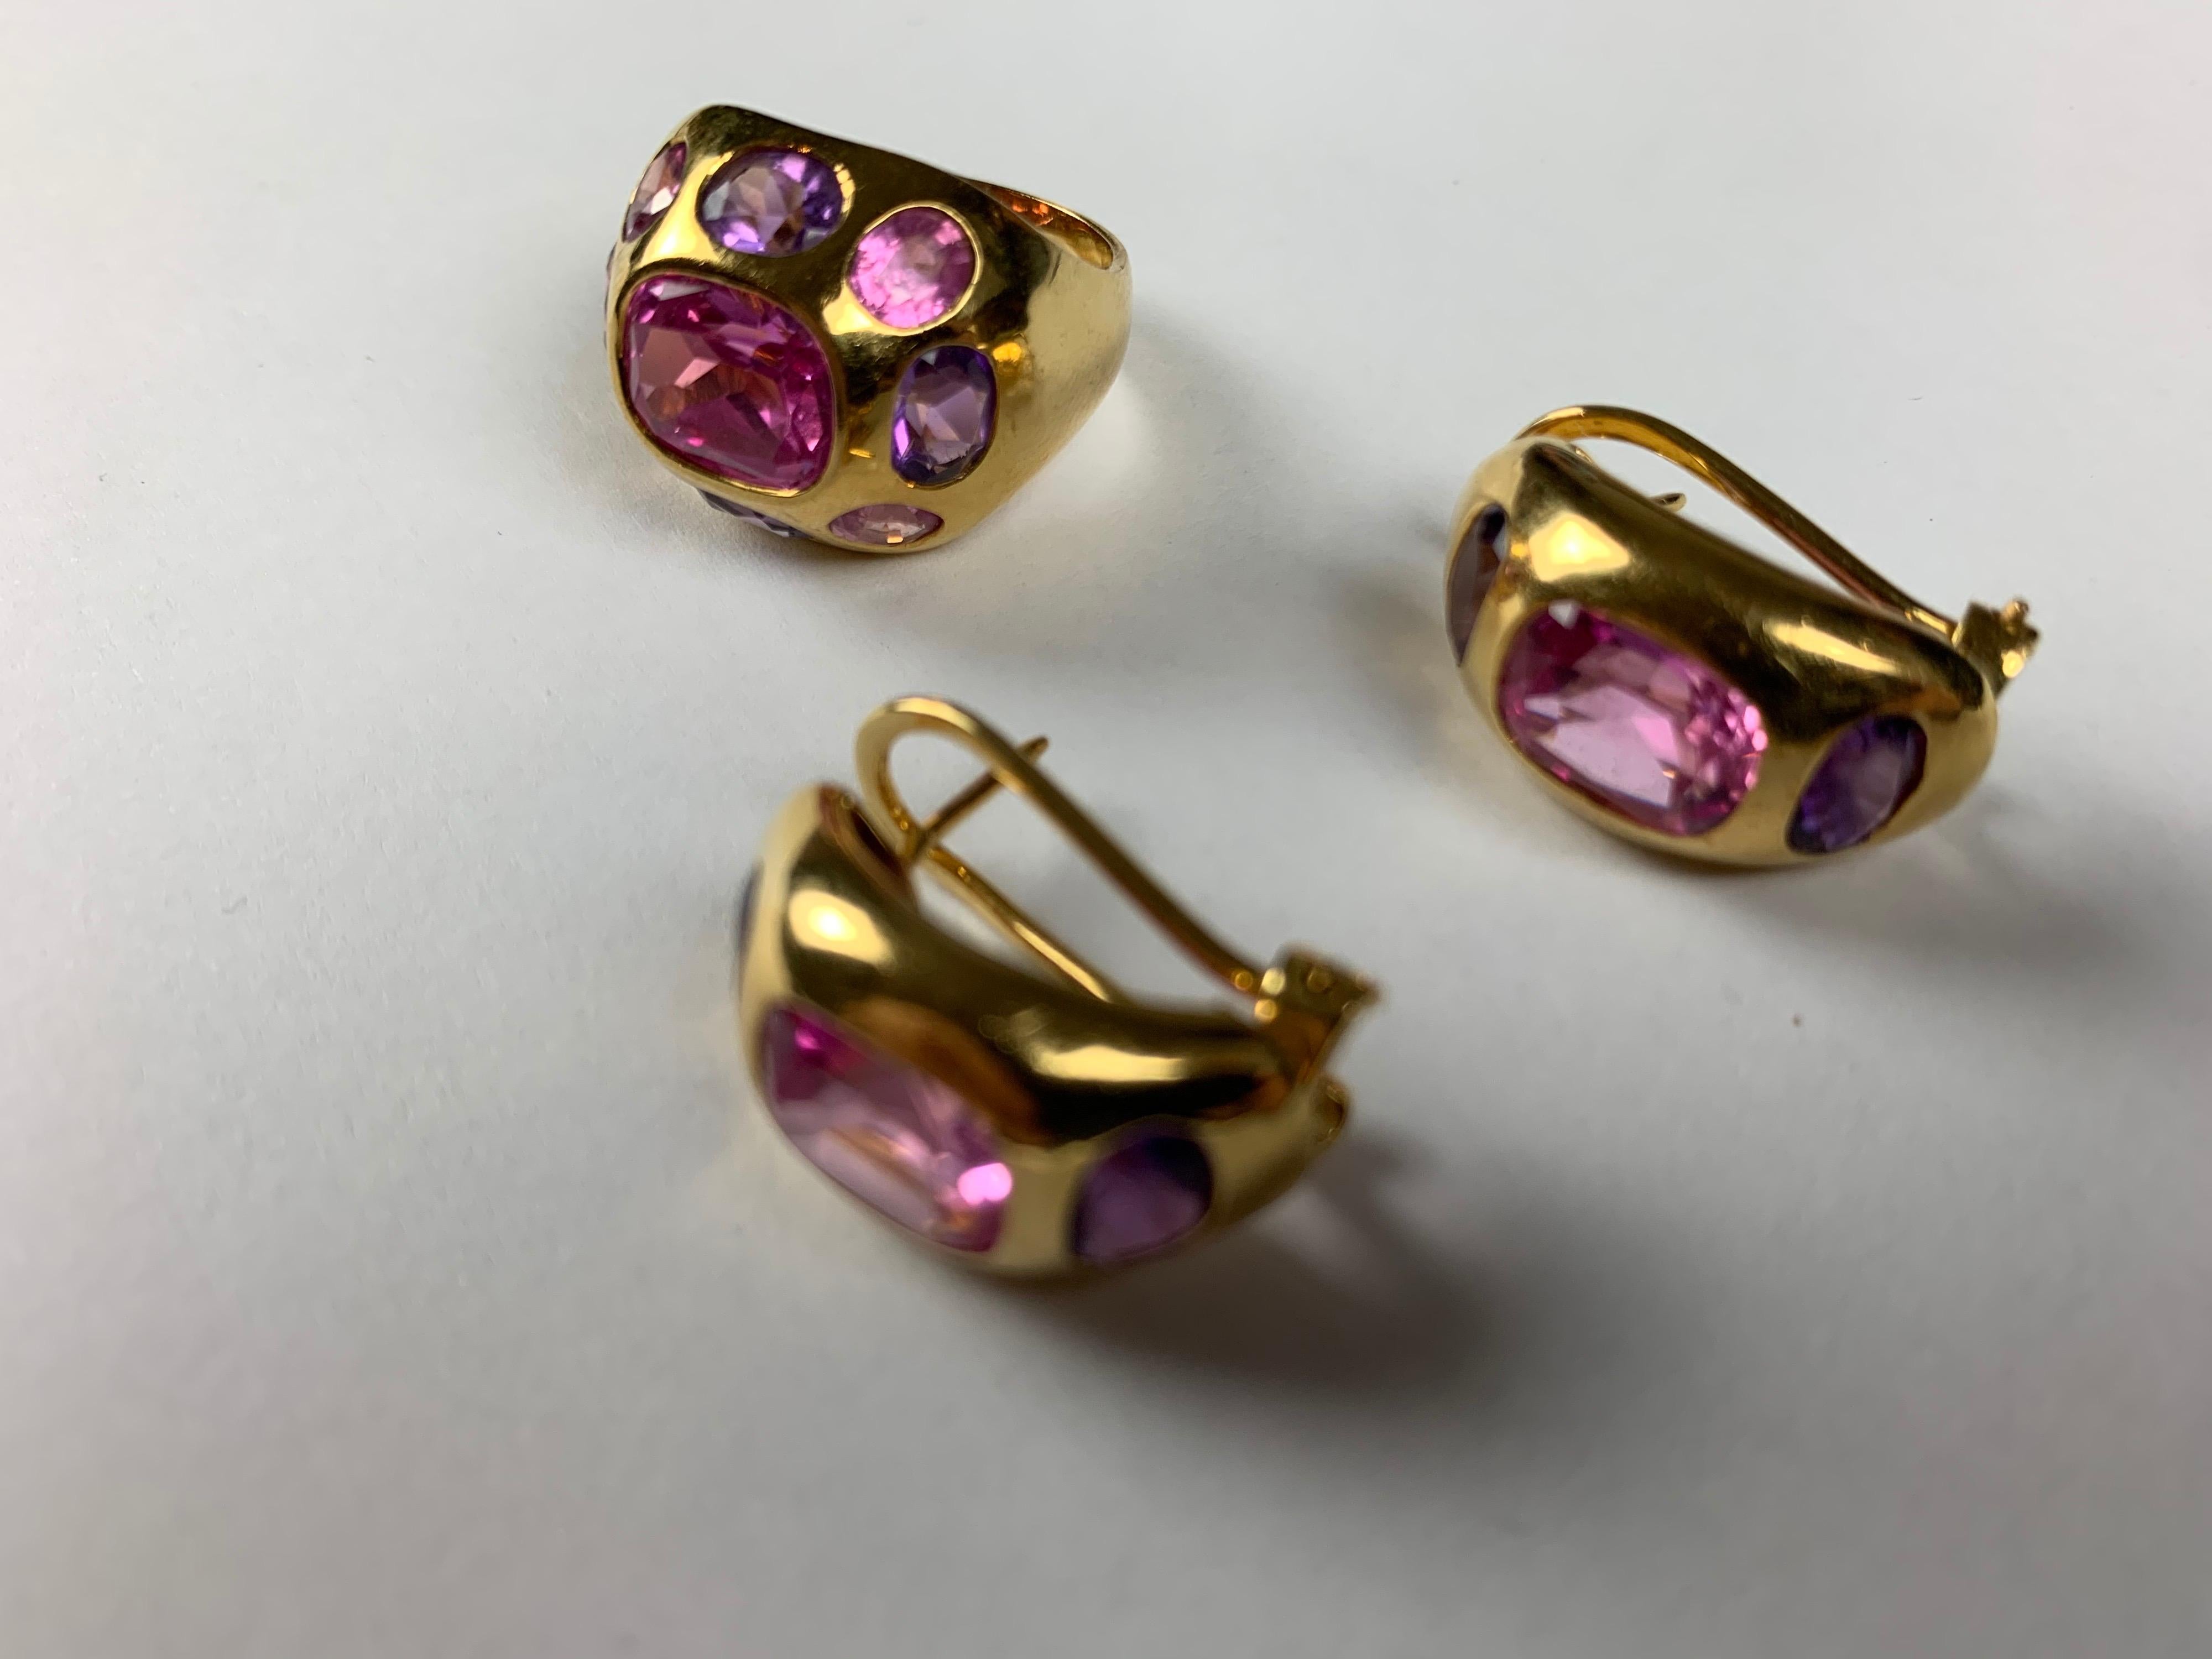 Set Of Ring And Earrings; 18 Carat Yellow Gold (4- 6 Carat) Pink Topaz With Purple Amethyst  